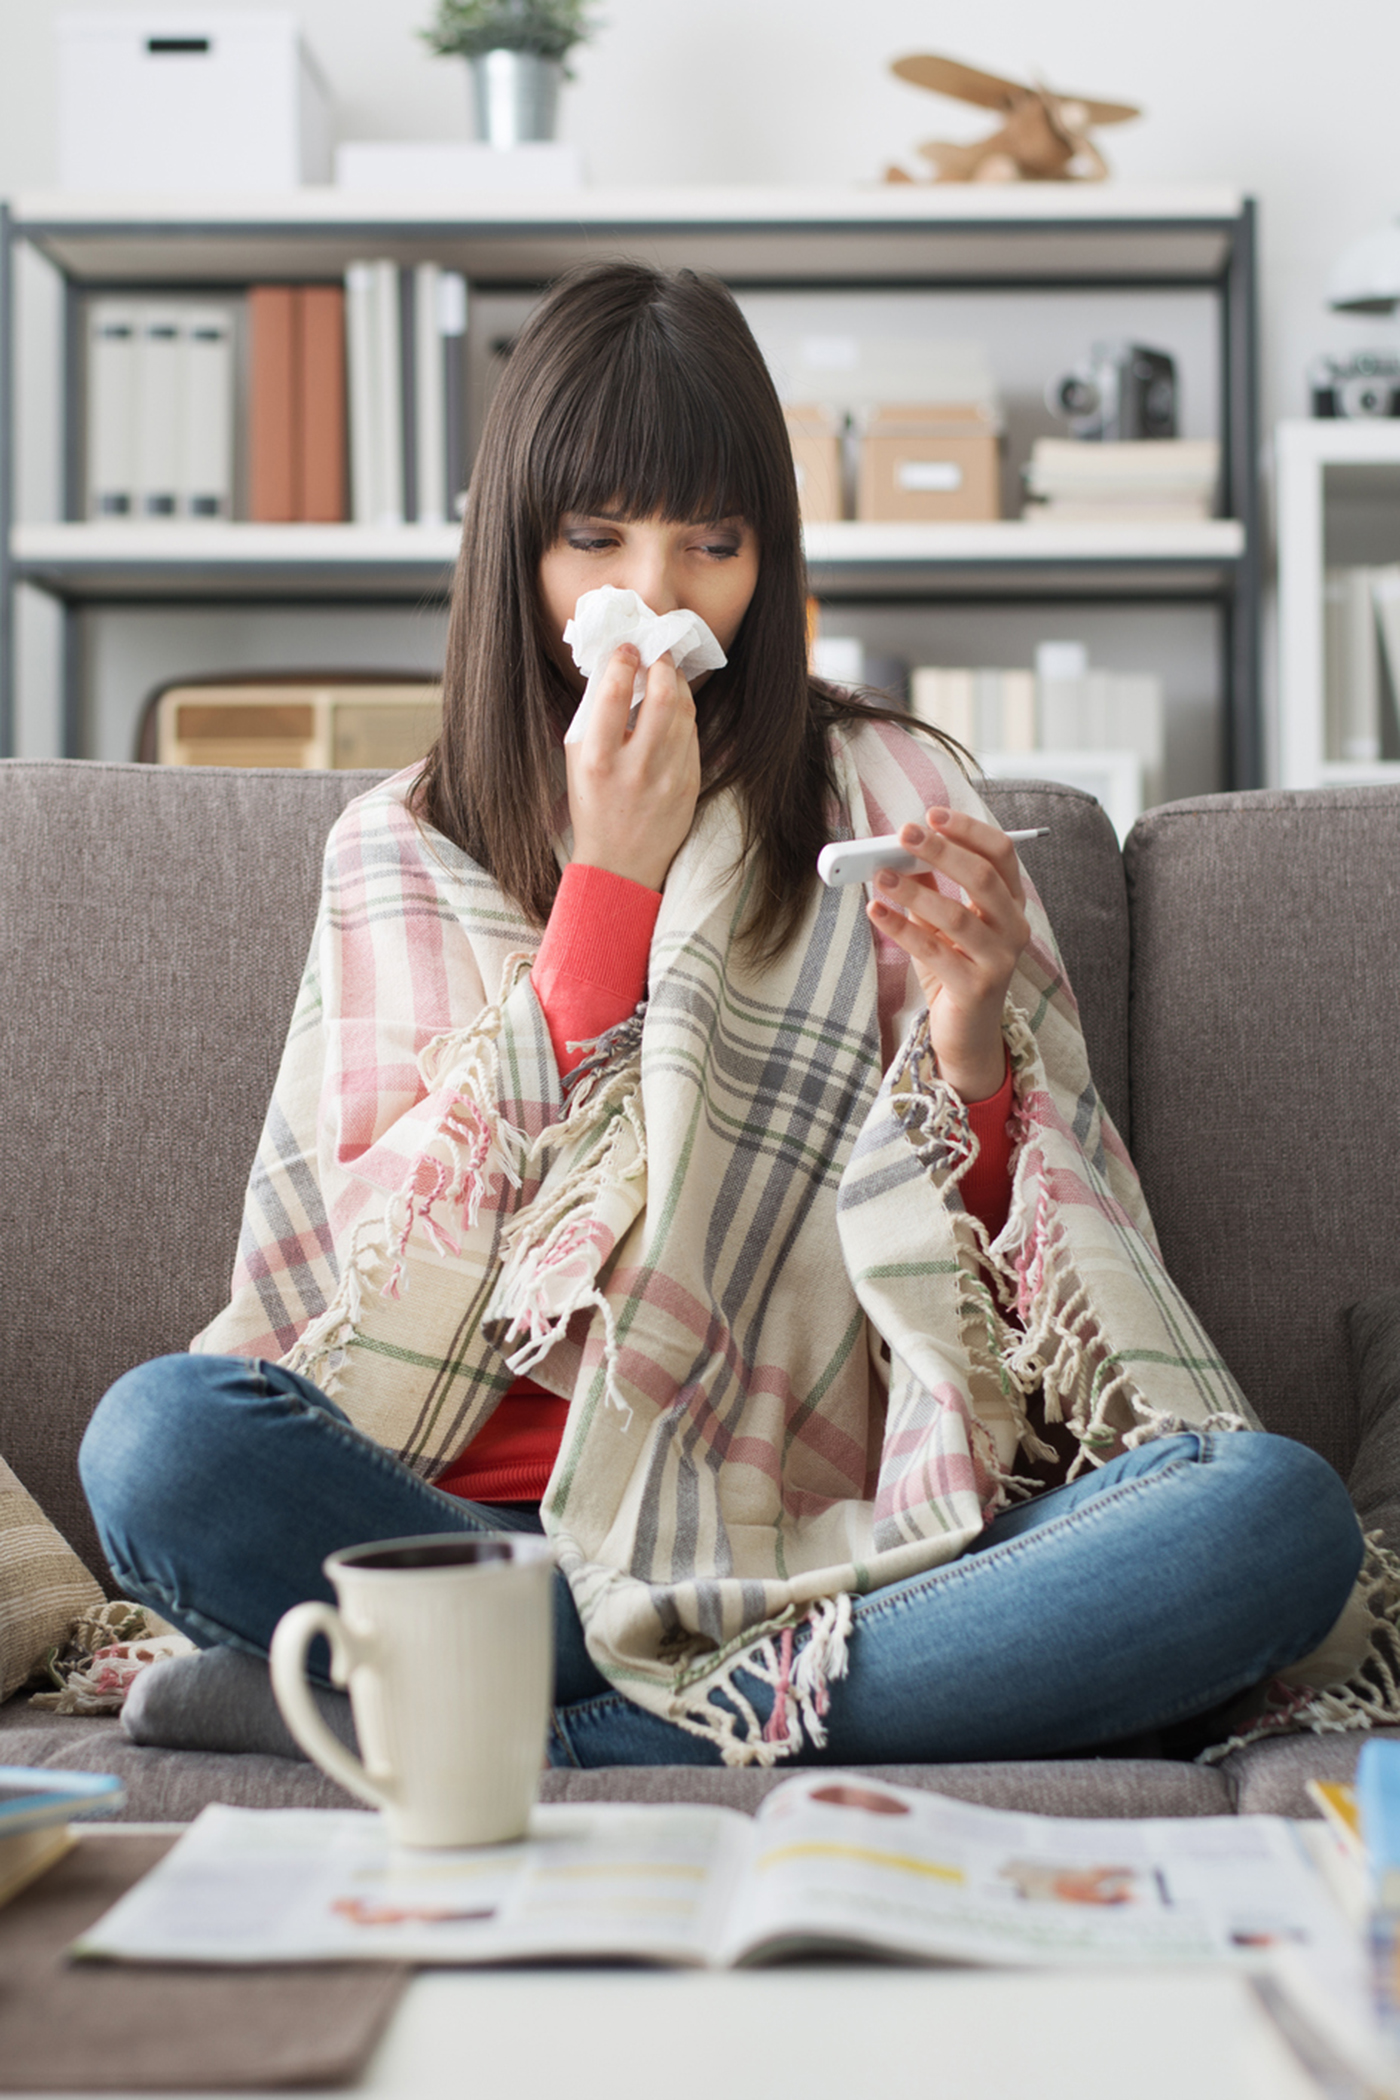 Stay Healthy - Cold and Flu Season Tips